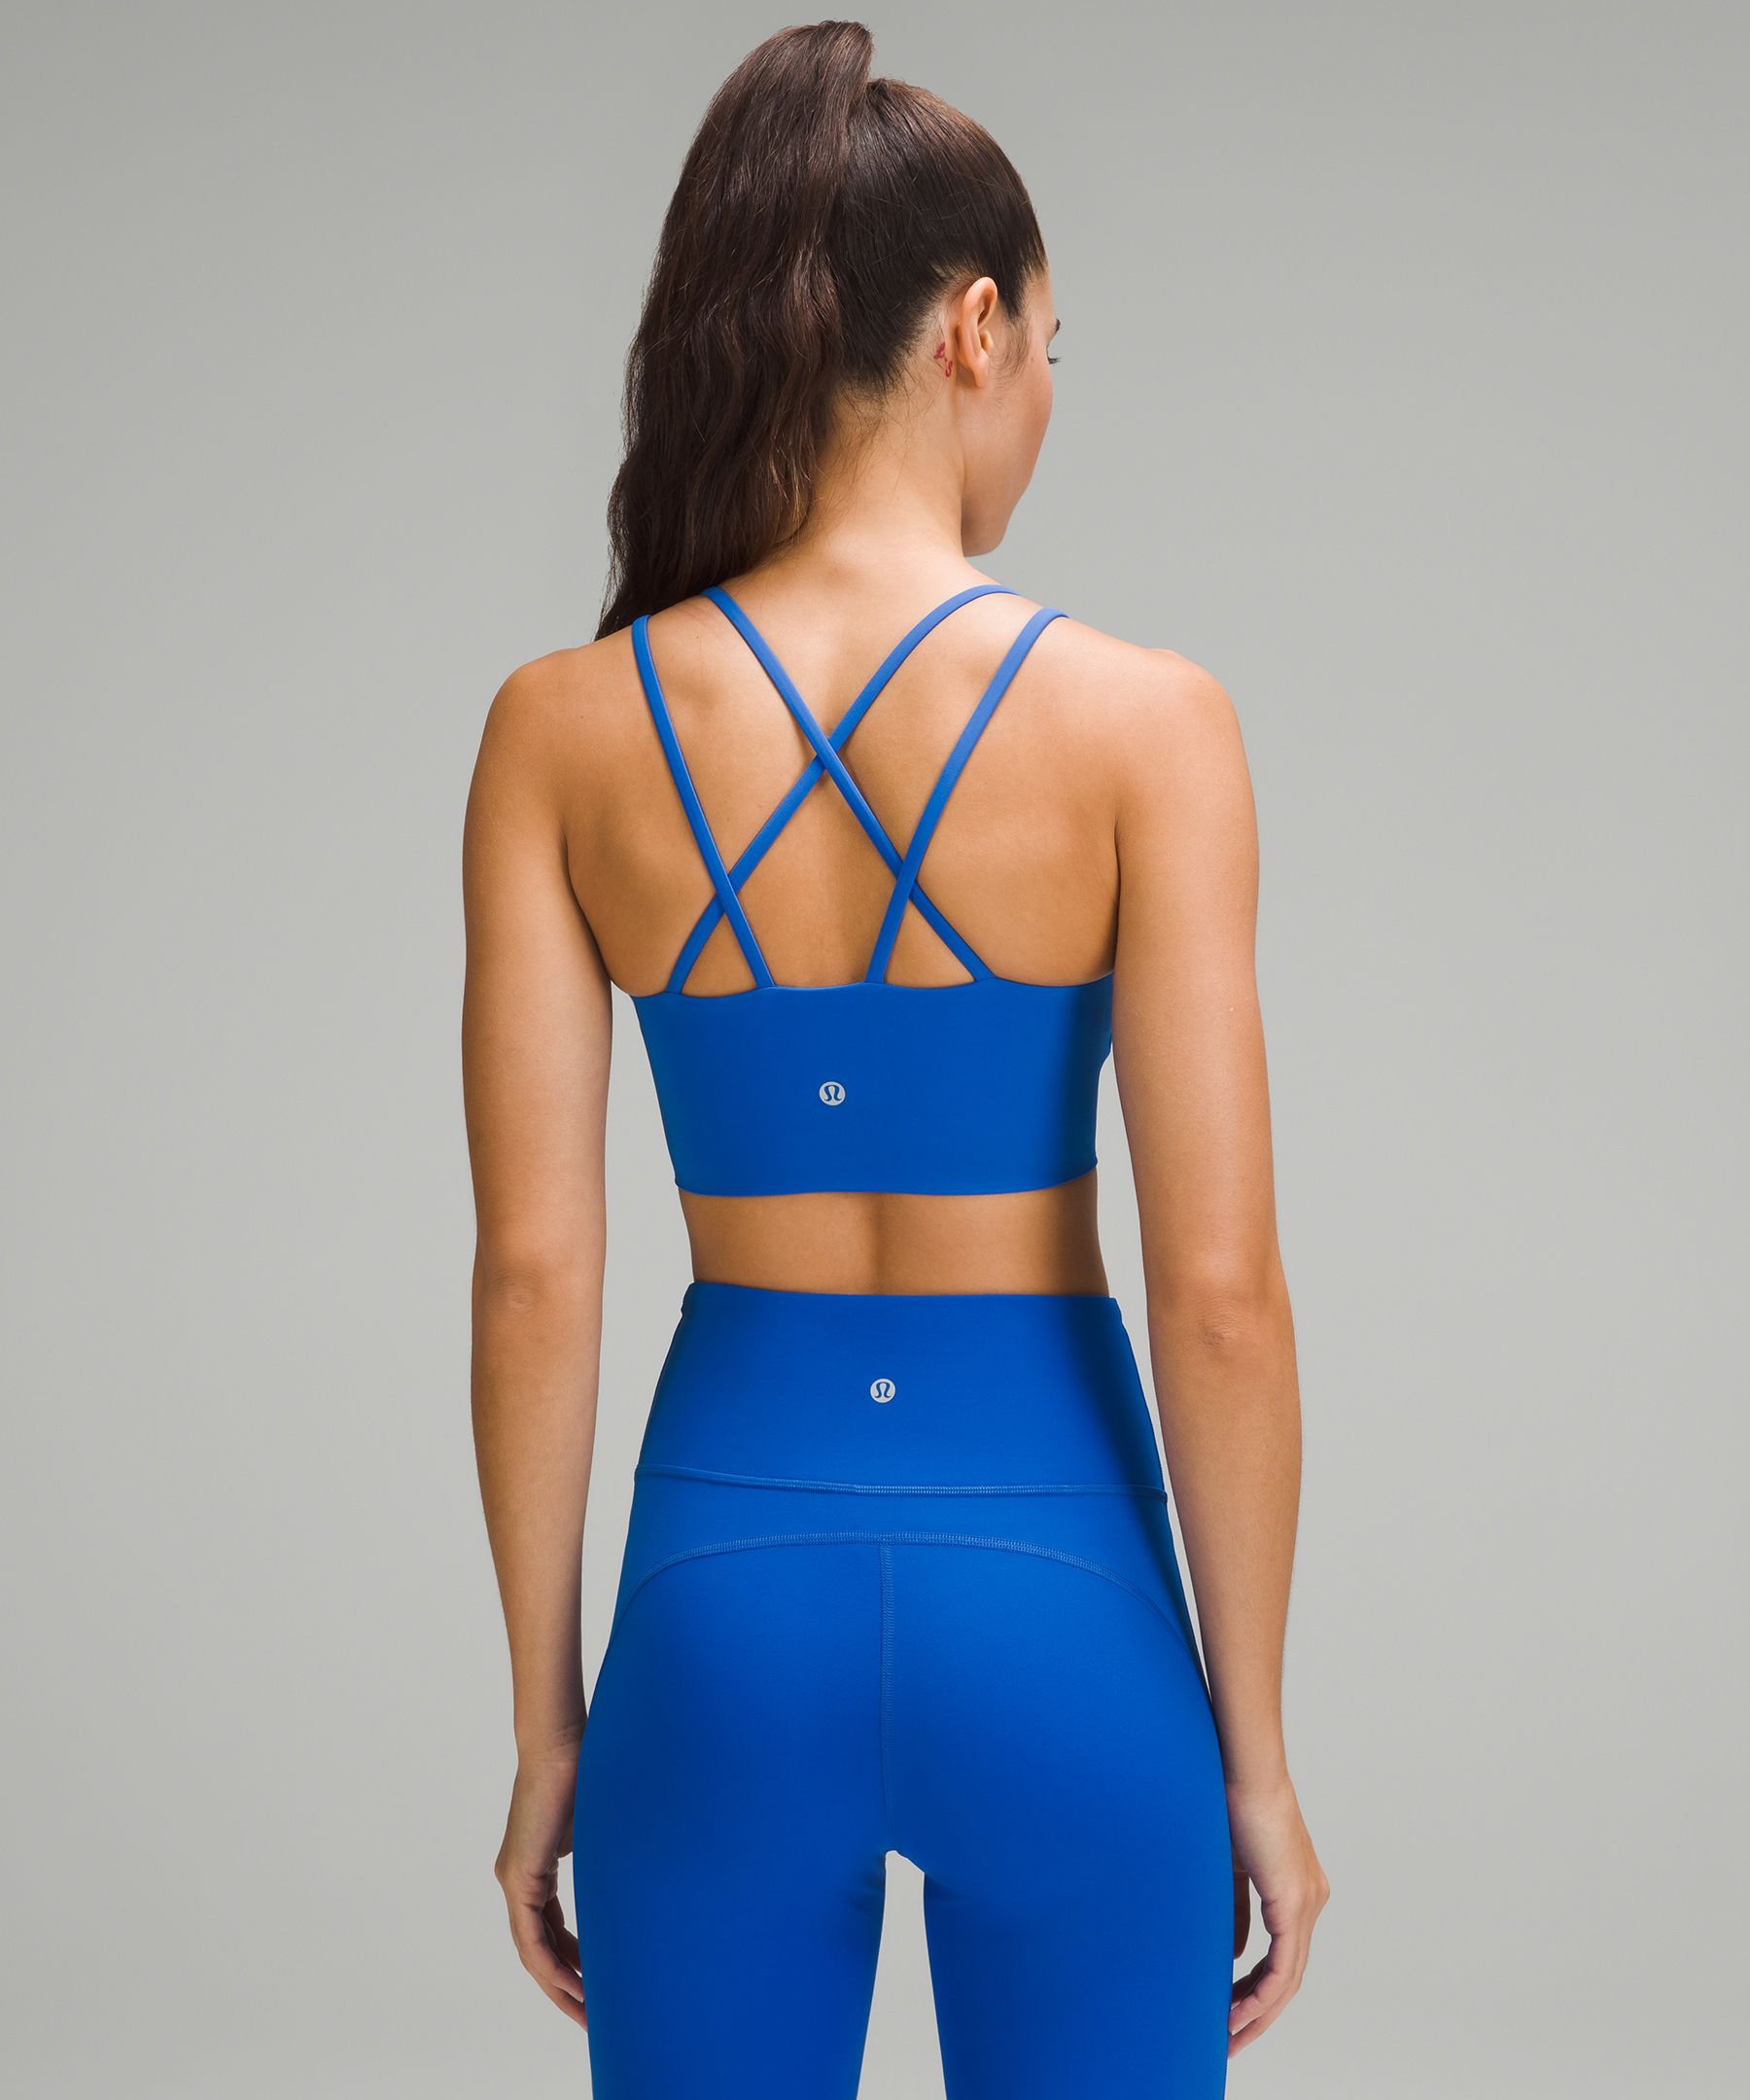 Lululemon Like A Cloud Longline Bra Tan Size M - $40 (18% Off Retail) New  With Tags - From Kelly